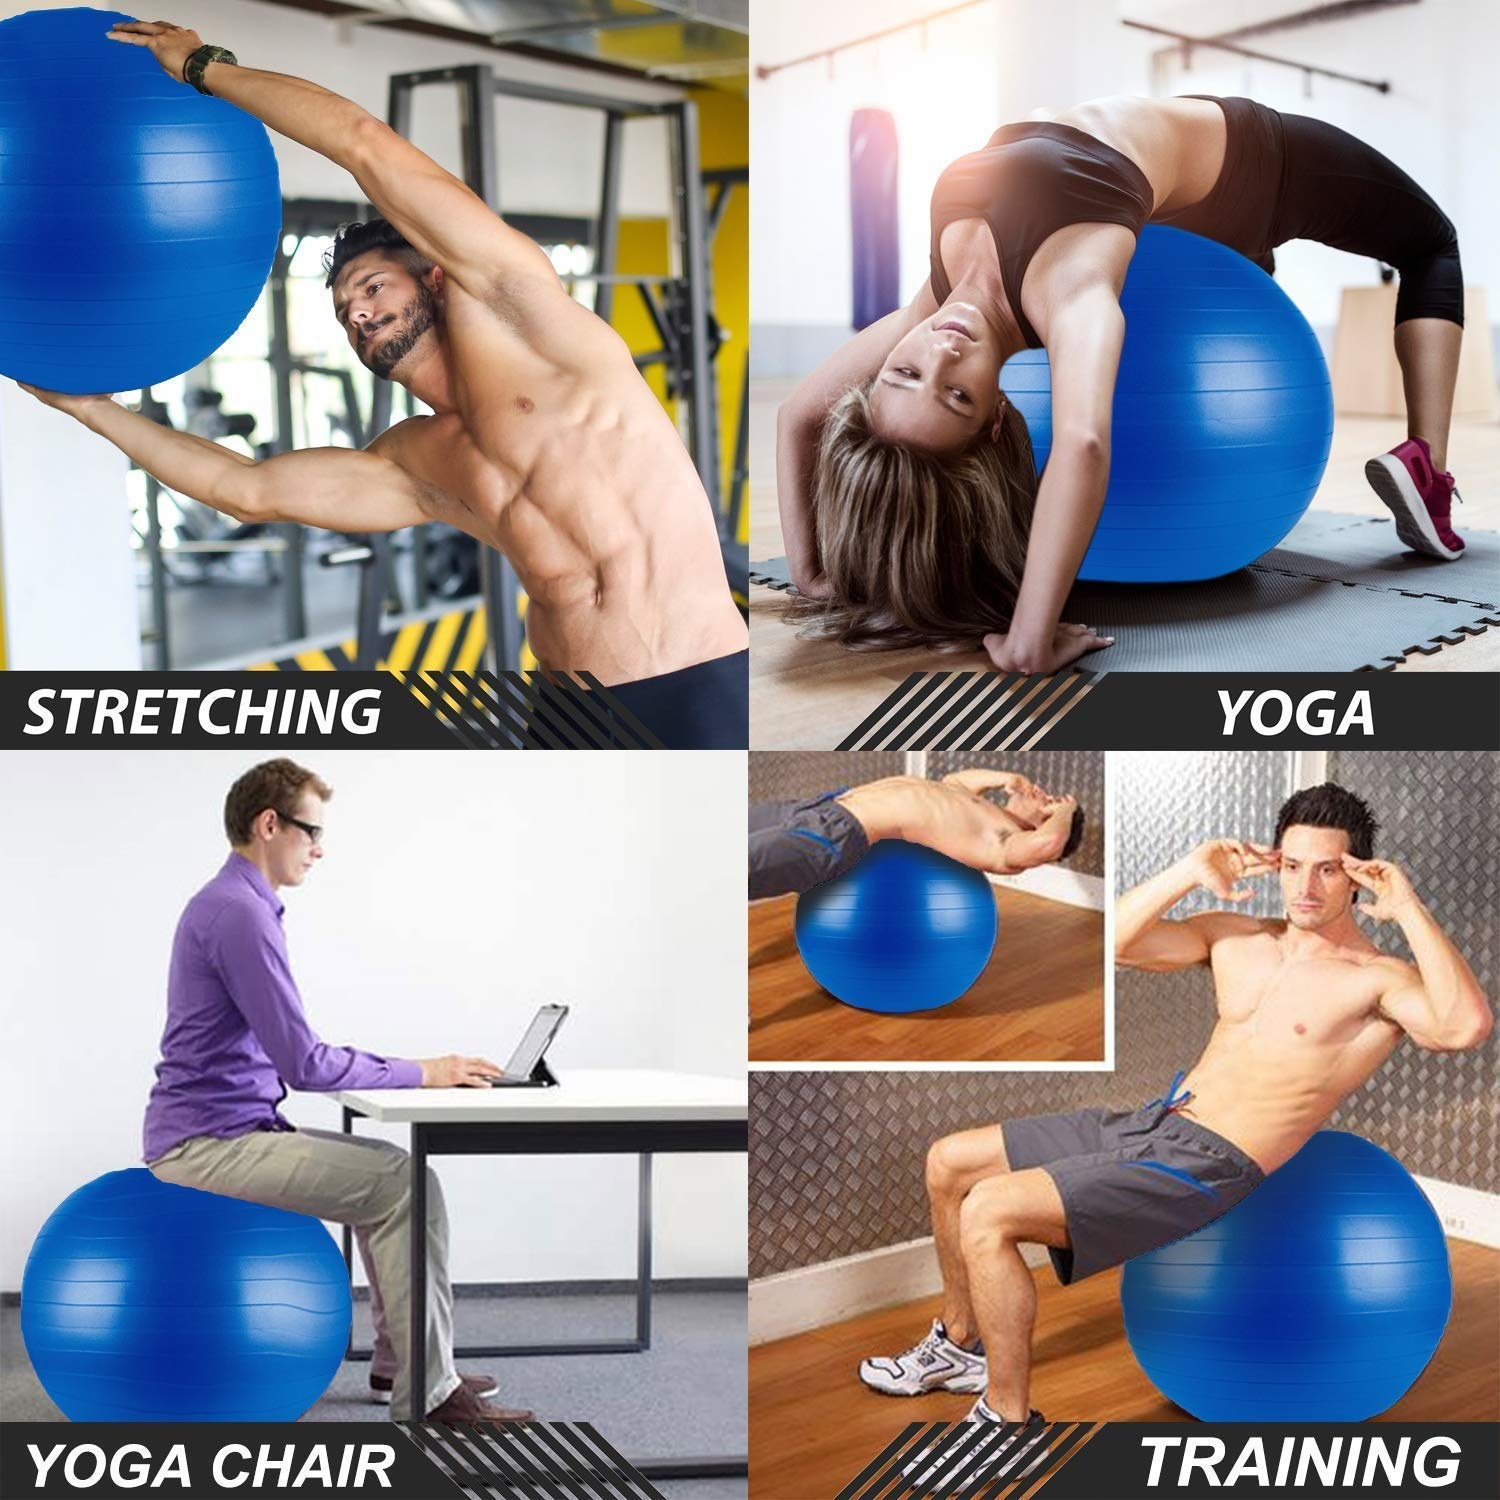 People using yoga ball for stretching, yoga, training and as a chair